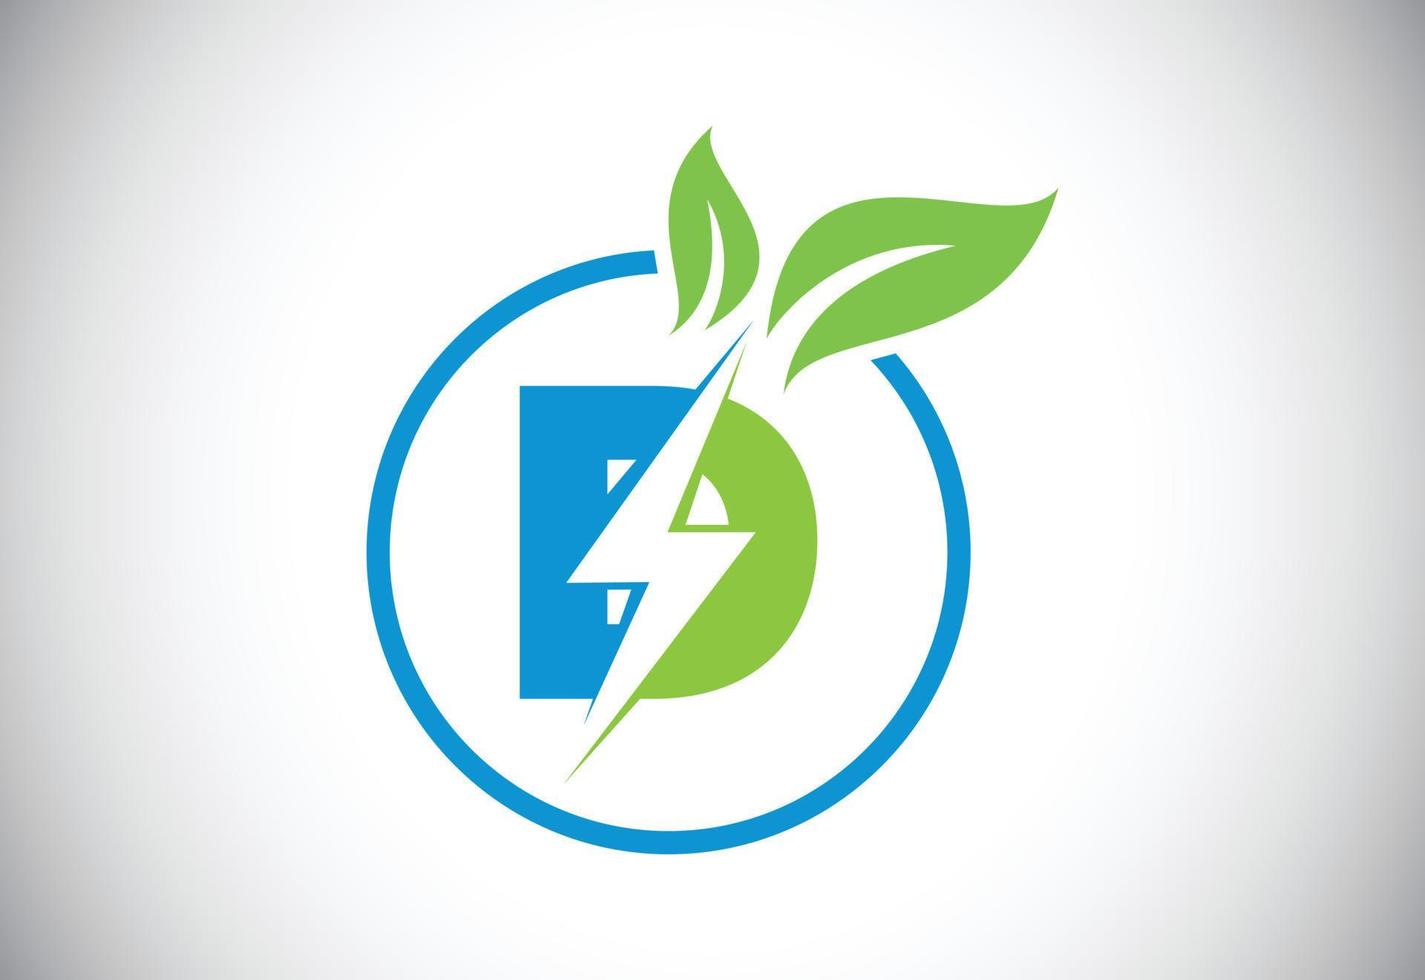 Initial D letter thunderbolt leaf circle or eco energy saver icon. Leaf and thunderbolt icon concept for nature power electric logo vector